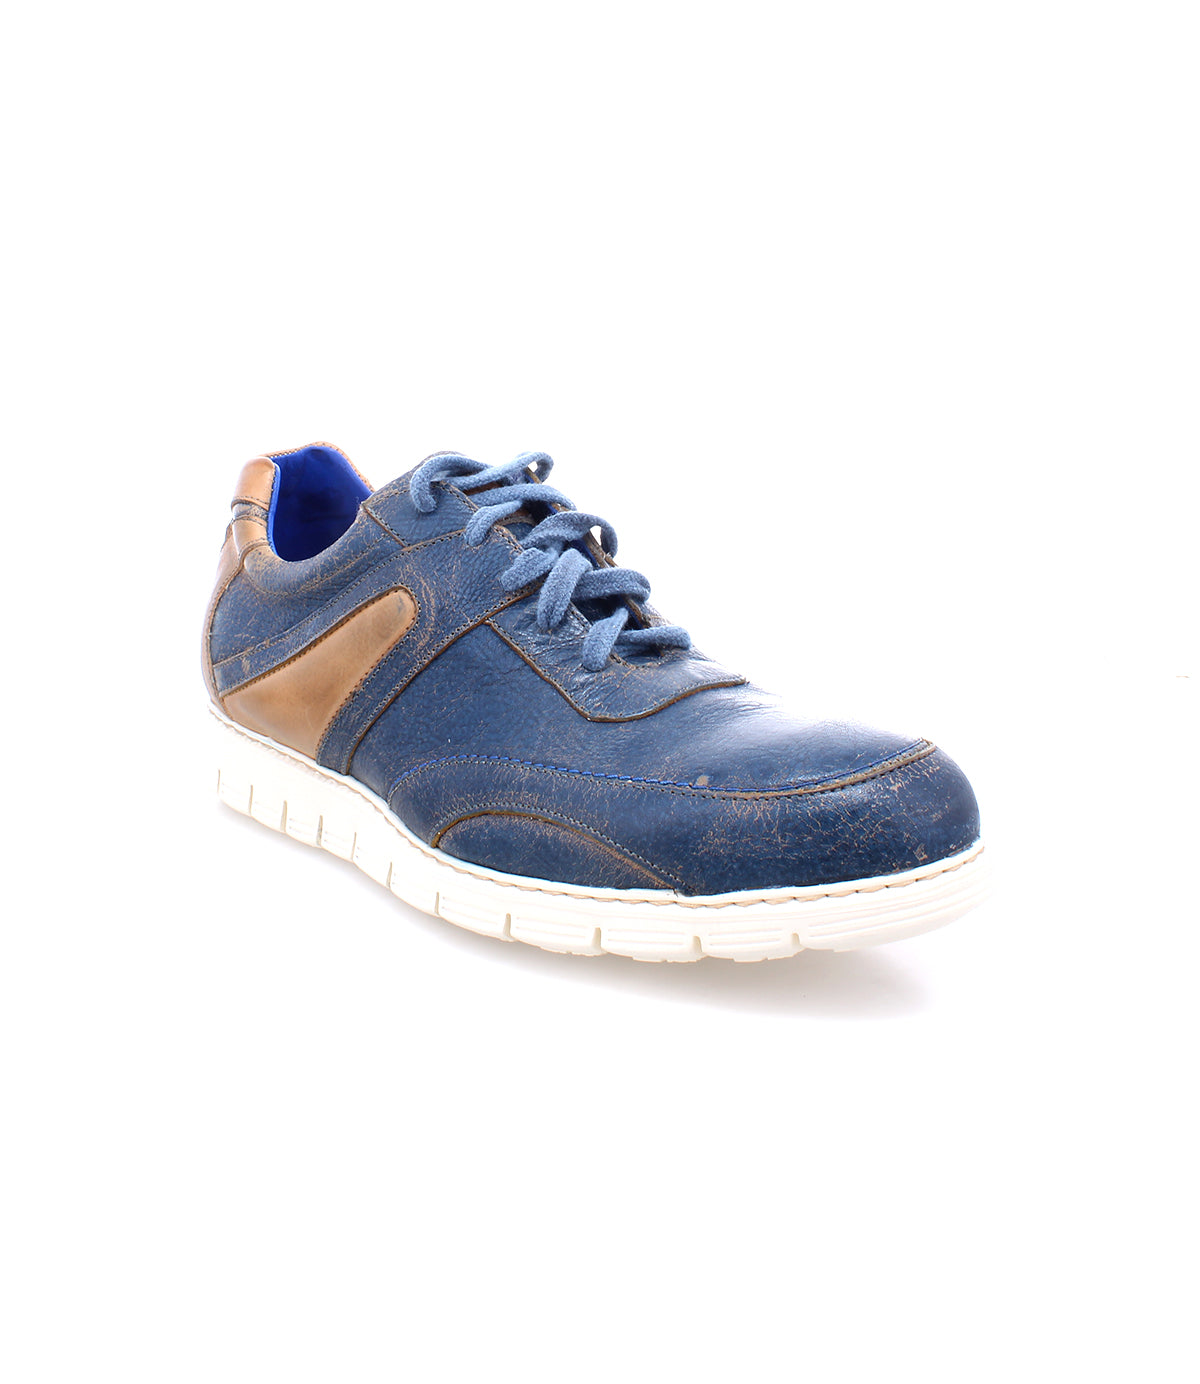 A pair of lightweight distressed lace-up Wardell sneakers for men in blue with brown laces by Bed Stu.